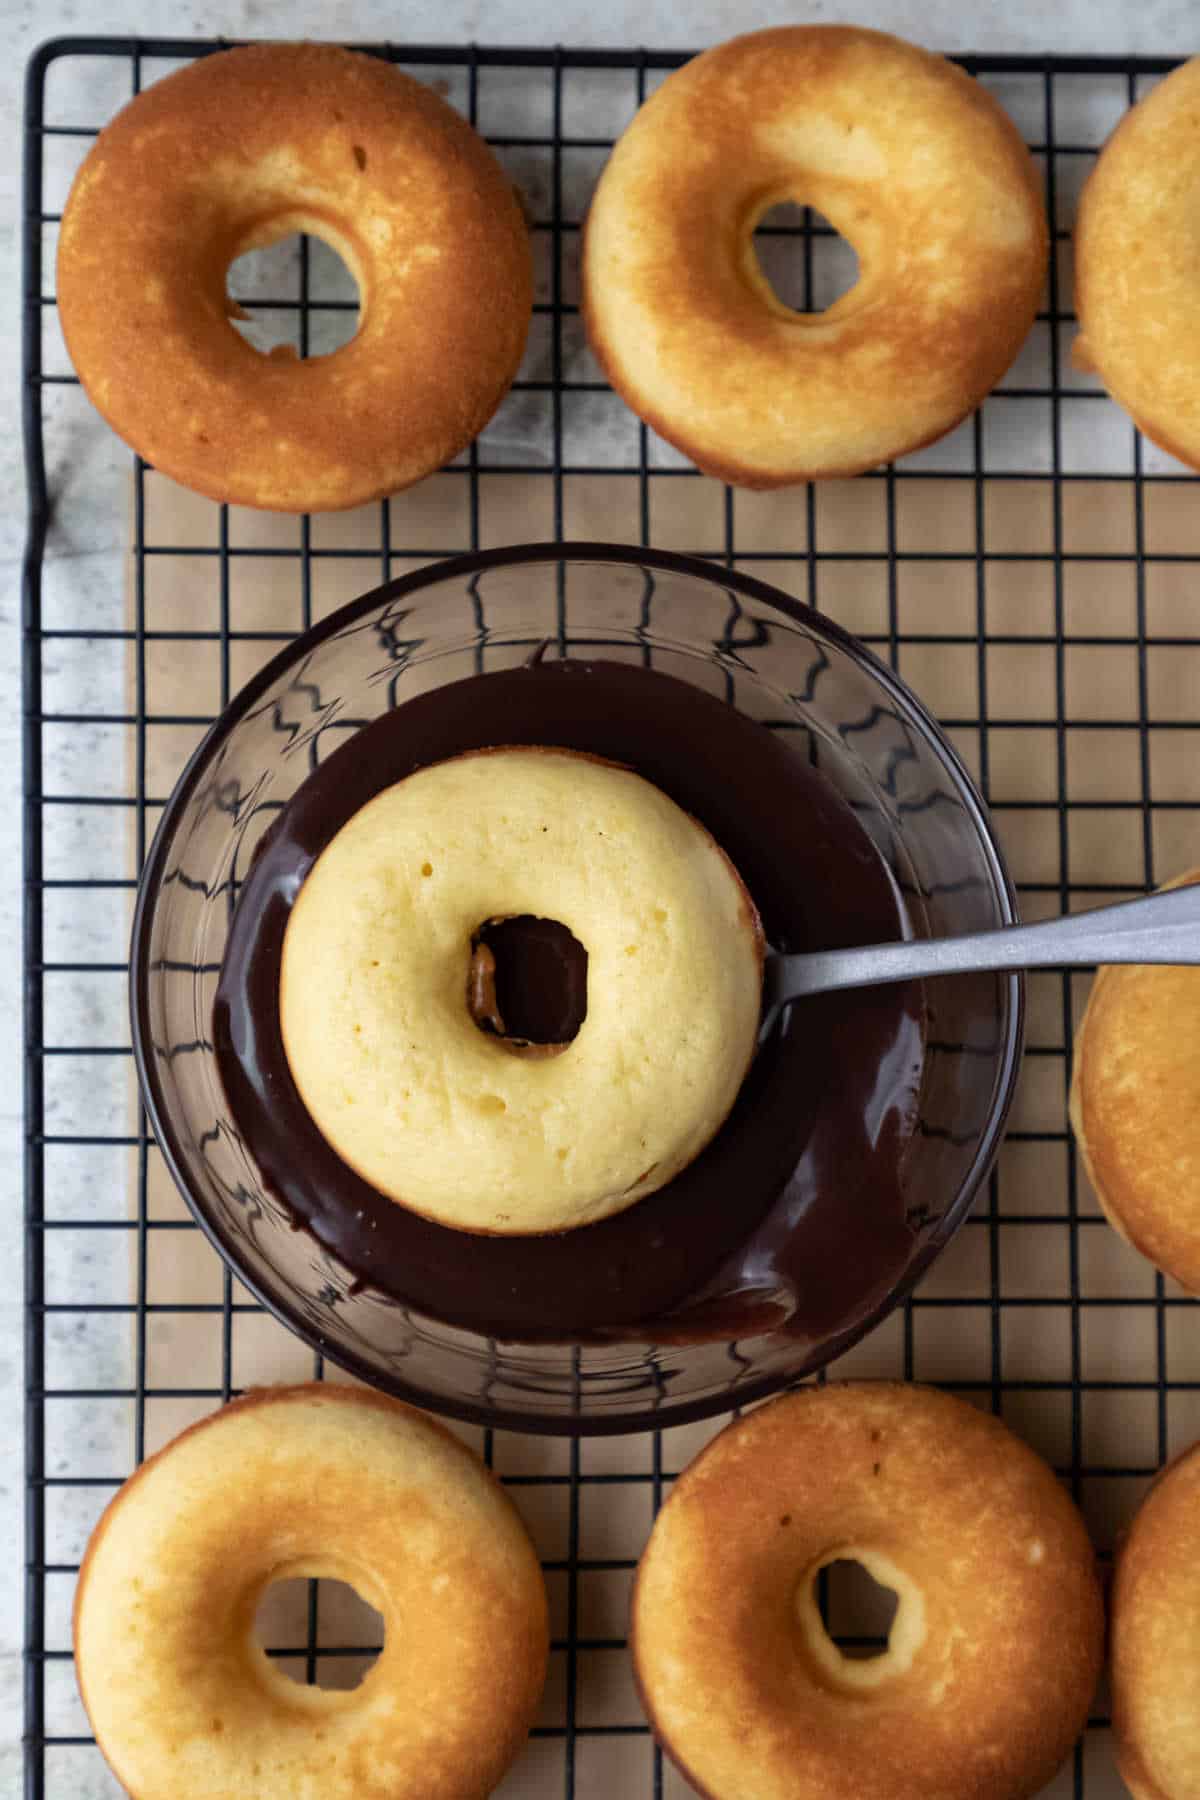 A donut upside down in a bowl of chocolate glaze. 